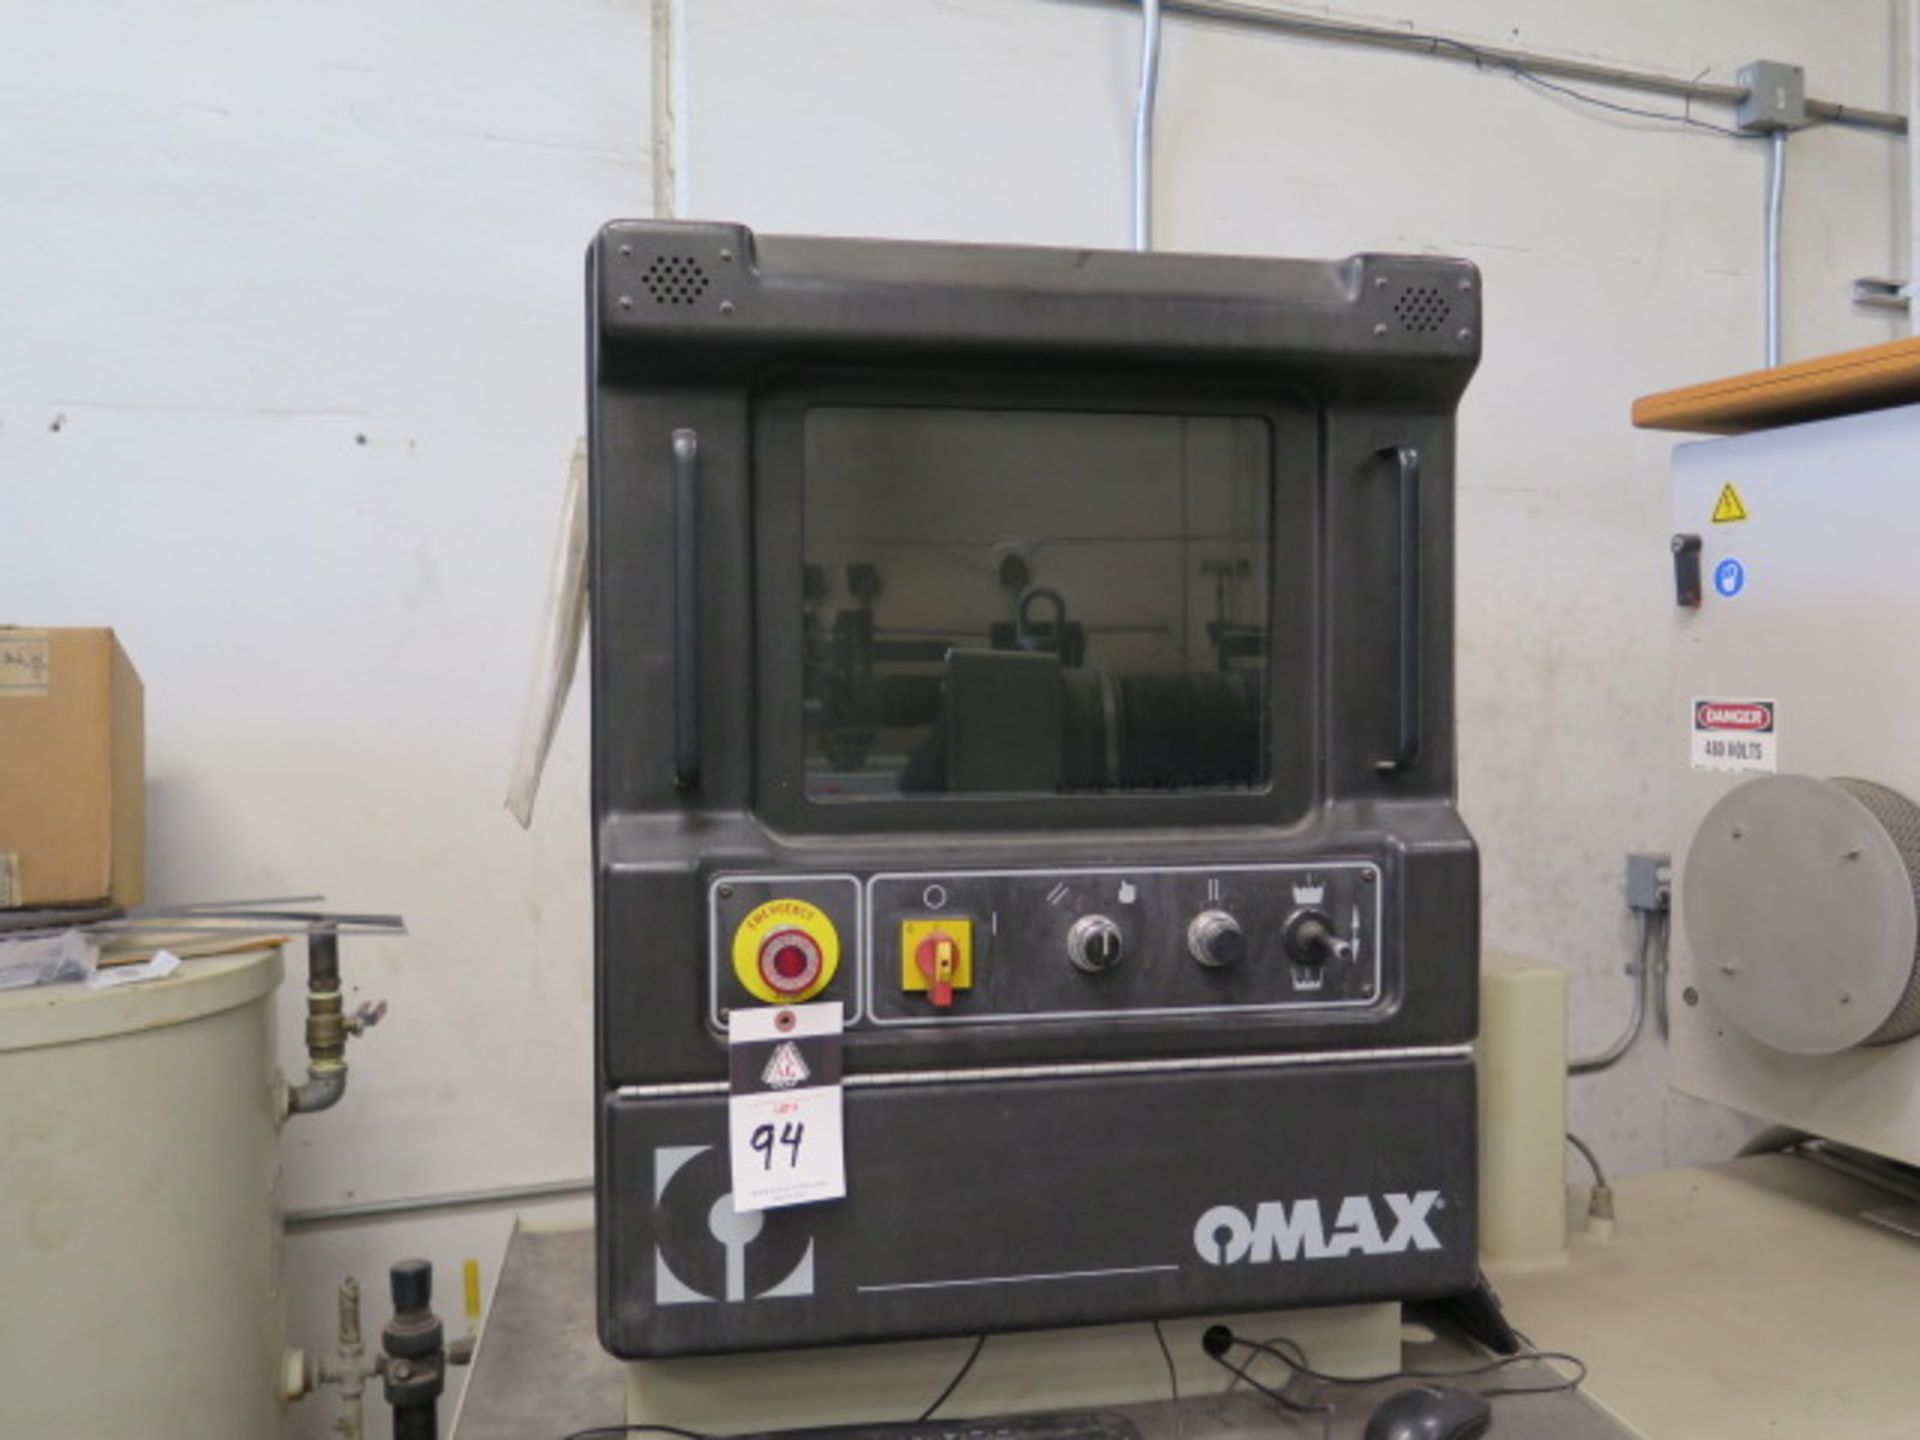 Omax “Fabricator” 80” x 160” CNC WaterJet Machine s/n G511506 w/ Omax MAKE Precision, SOLD AS IS - Image 10 of 16